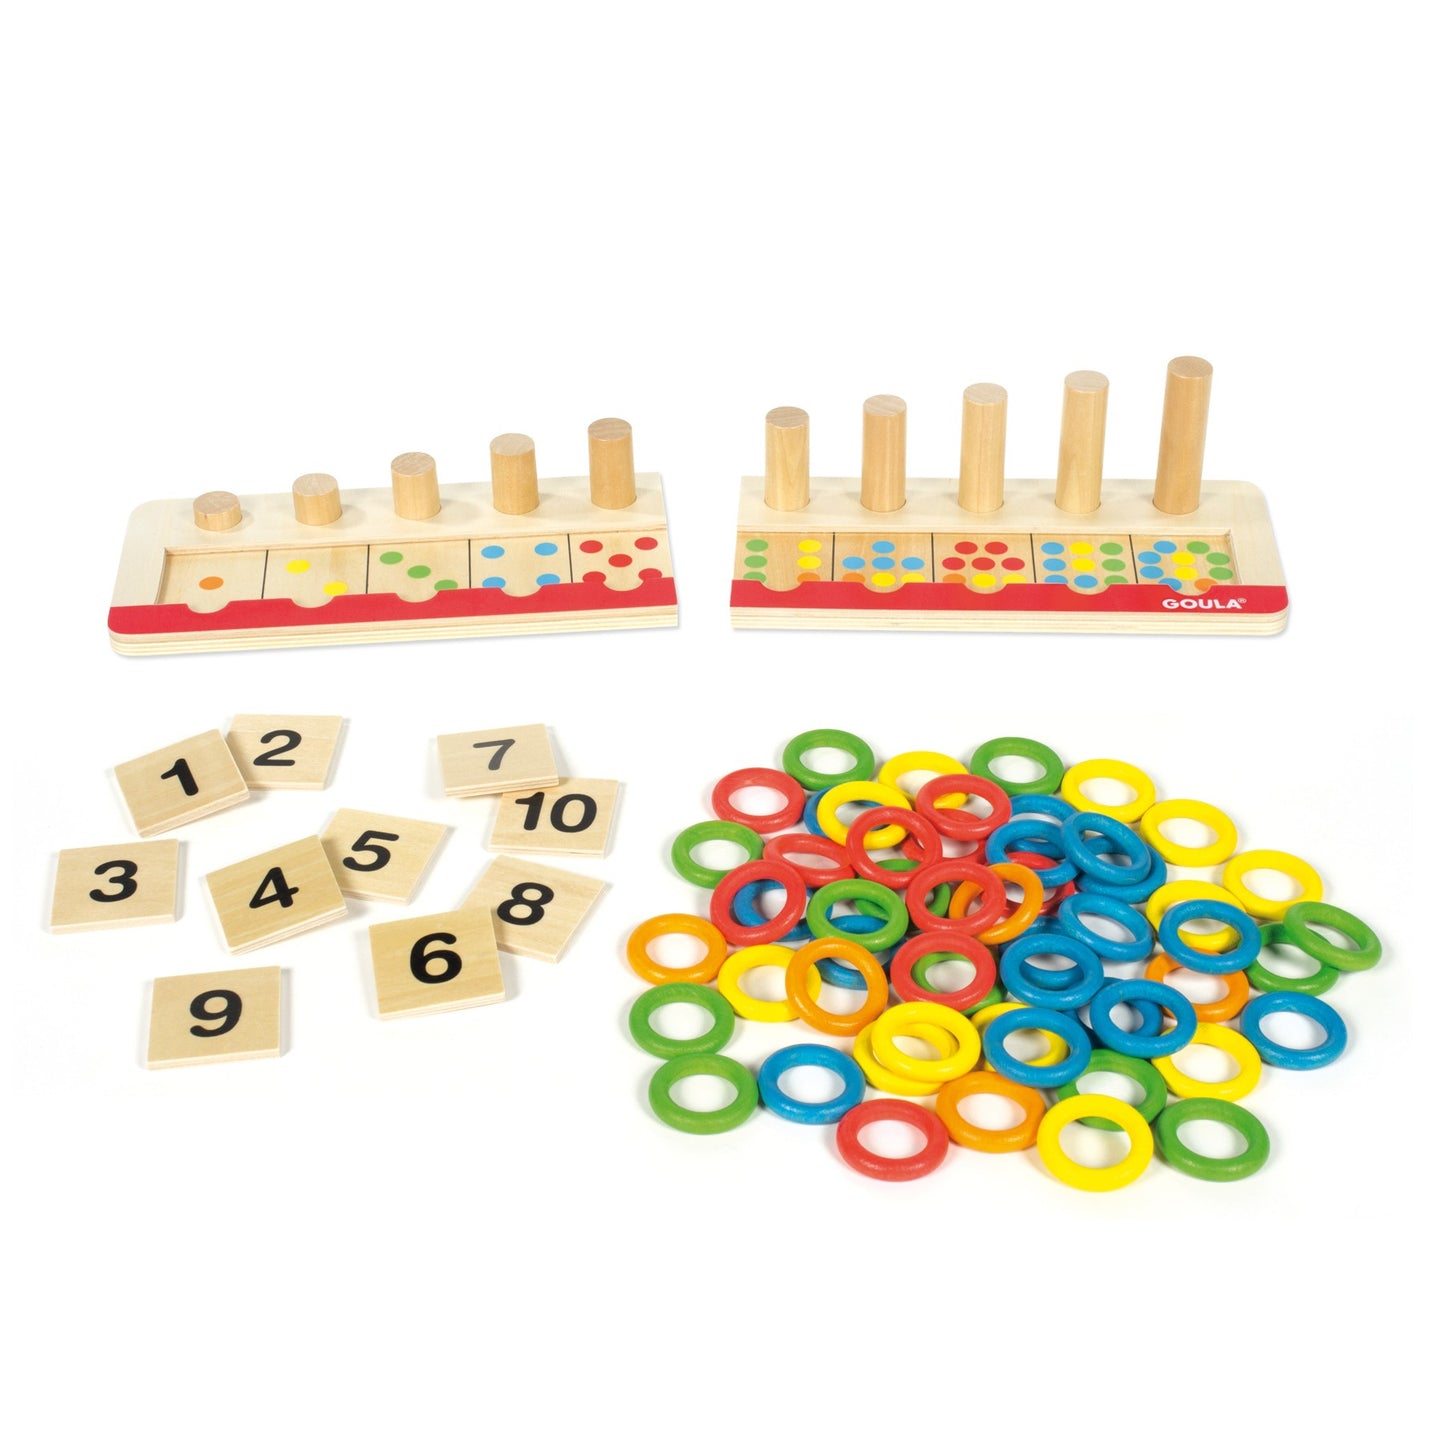 Goula Anillas Colores & Numbers Sorting & Pegging Game